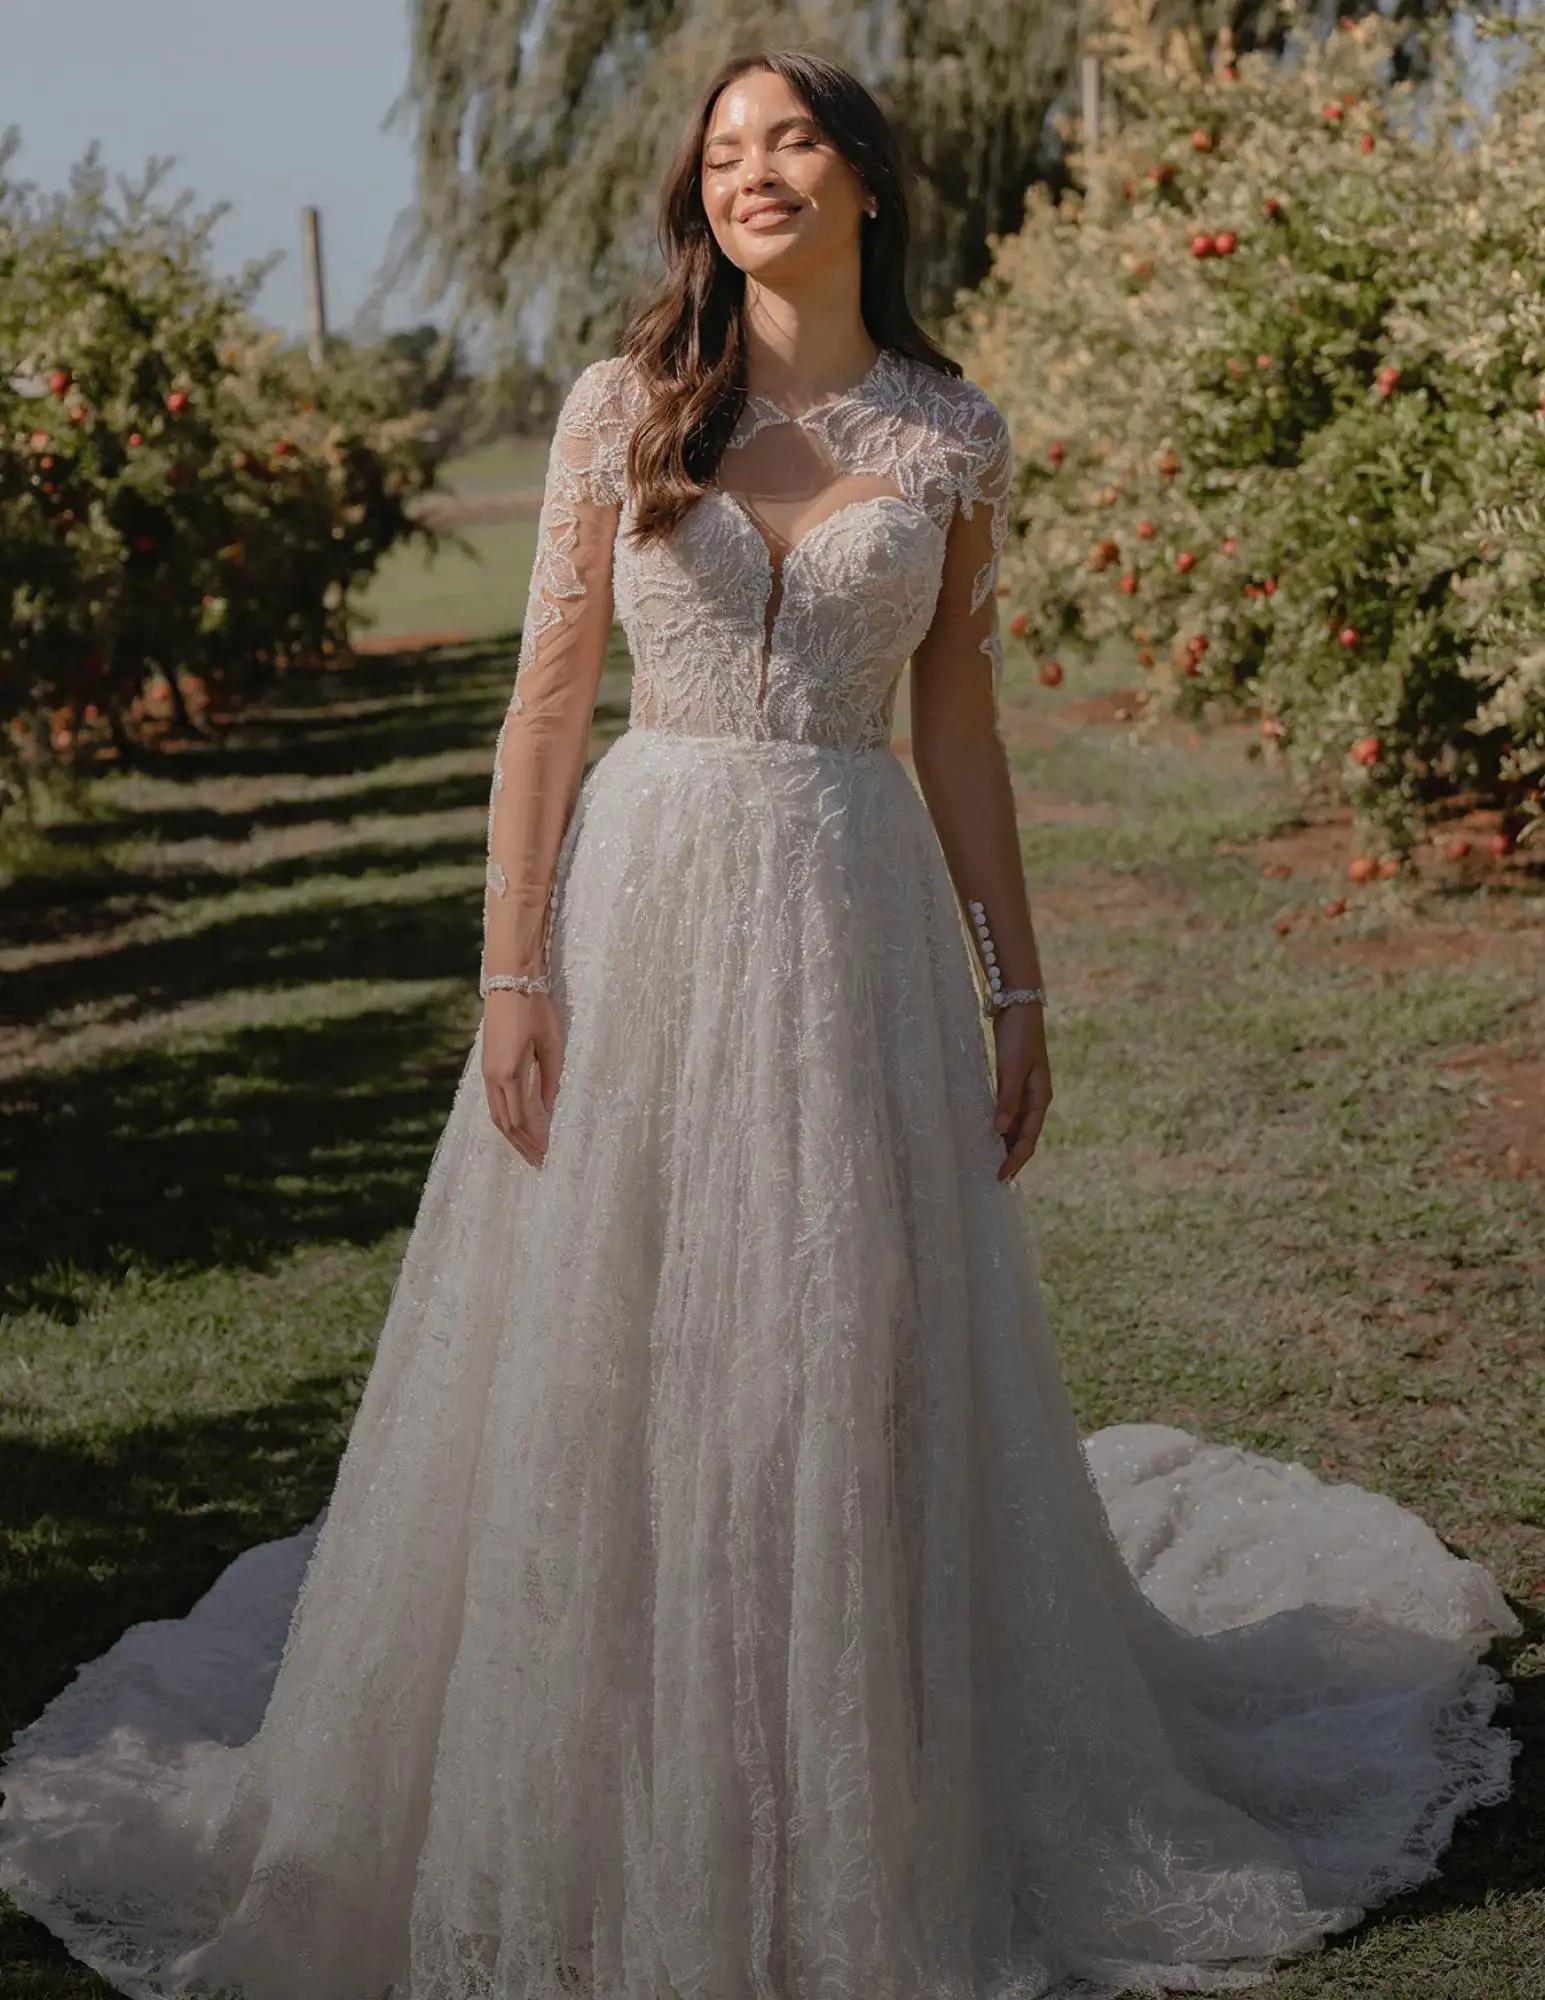 Bride in Madi Lane Gown/